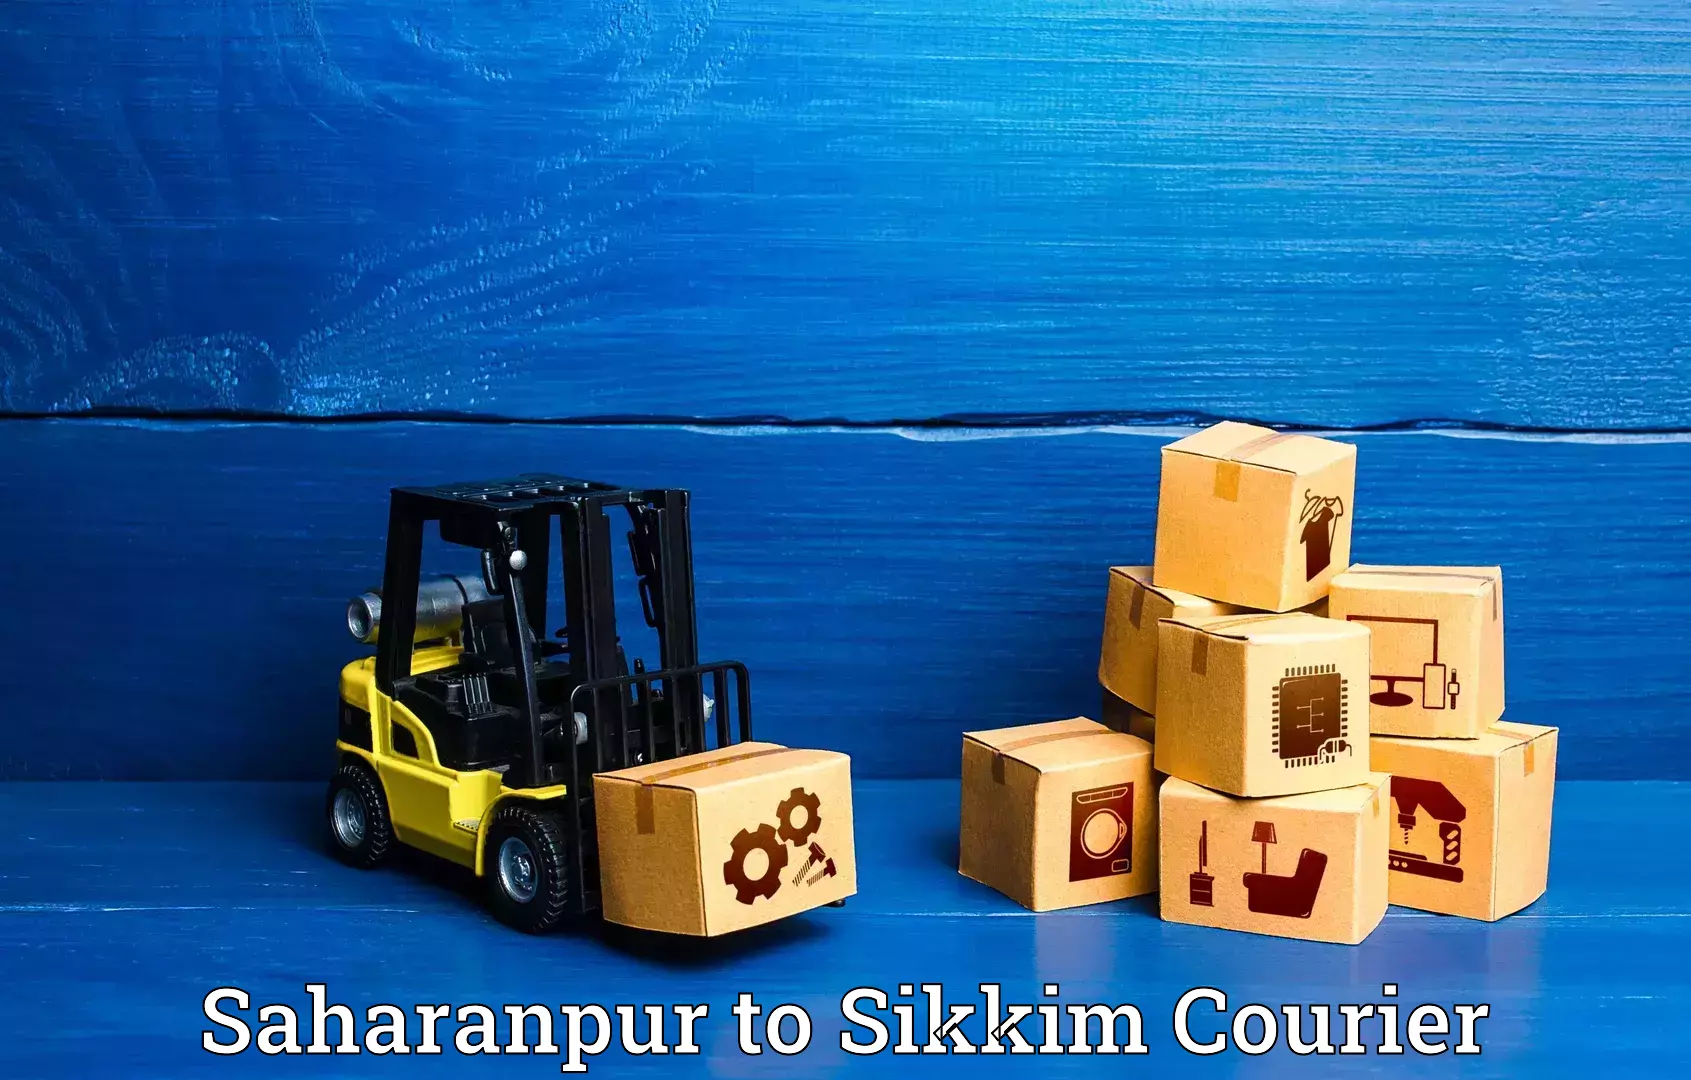 Luggage transport company Saharanpur to South Sikkim